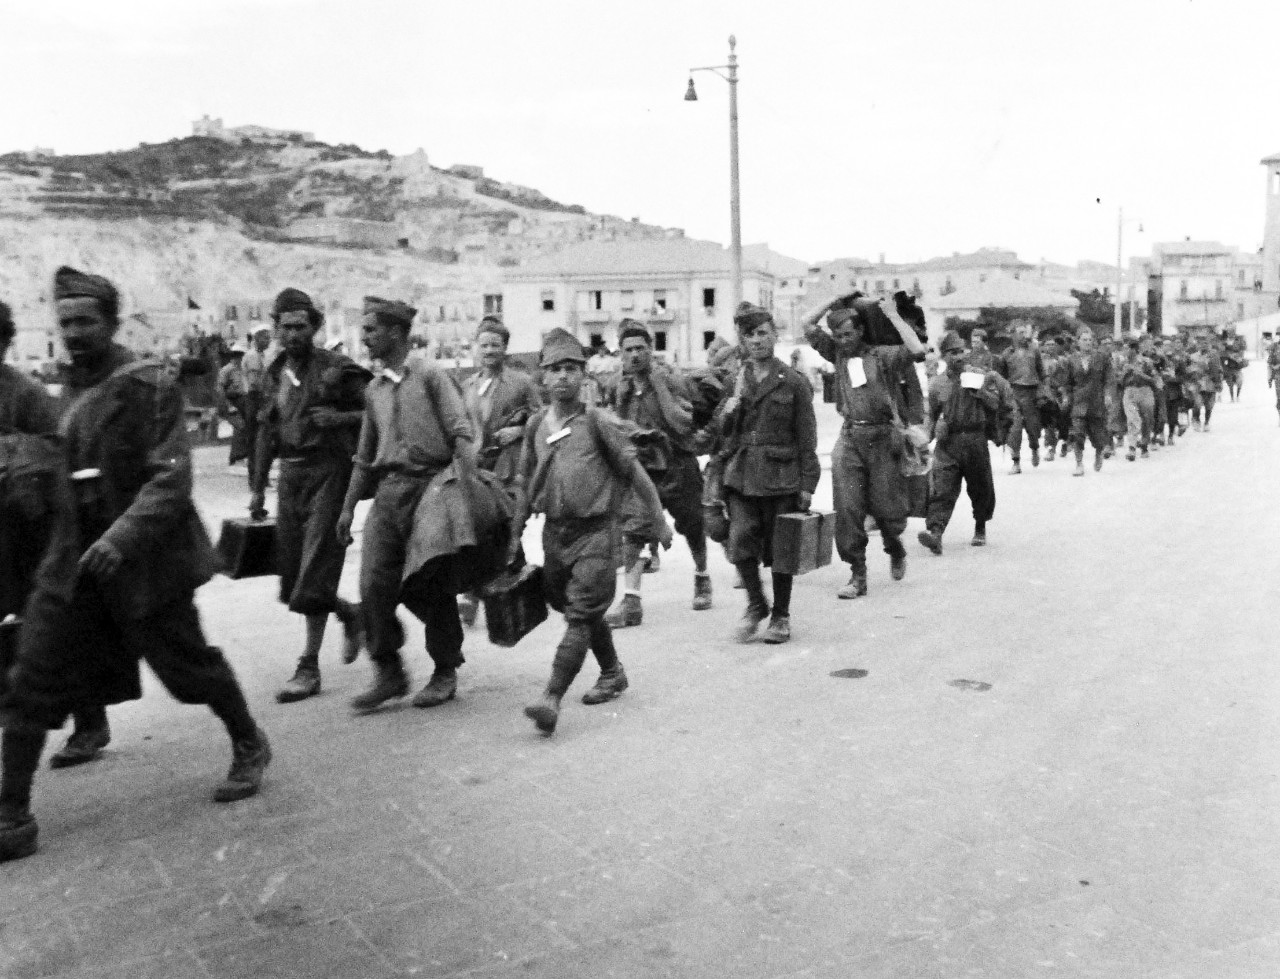 80-G-55364:   Operation Husky, July-August 1943.   Italian Prisoners at Licata, Sicily, Italy.   Photograph received November 11, 1943.  Official U.S. Navy Photograph, now in the collections of the National Archives.  (2015/4/28). 